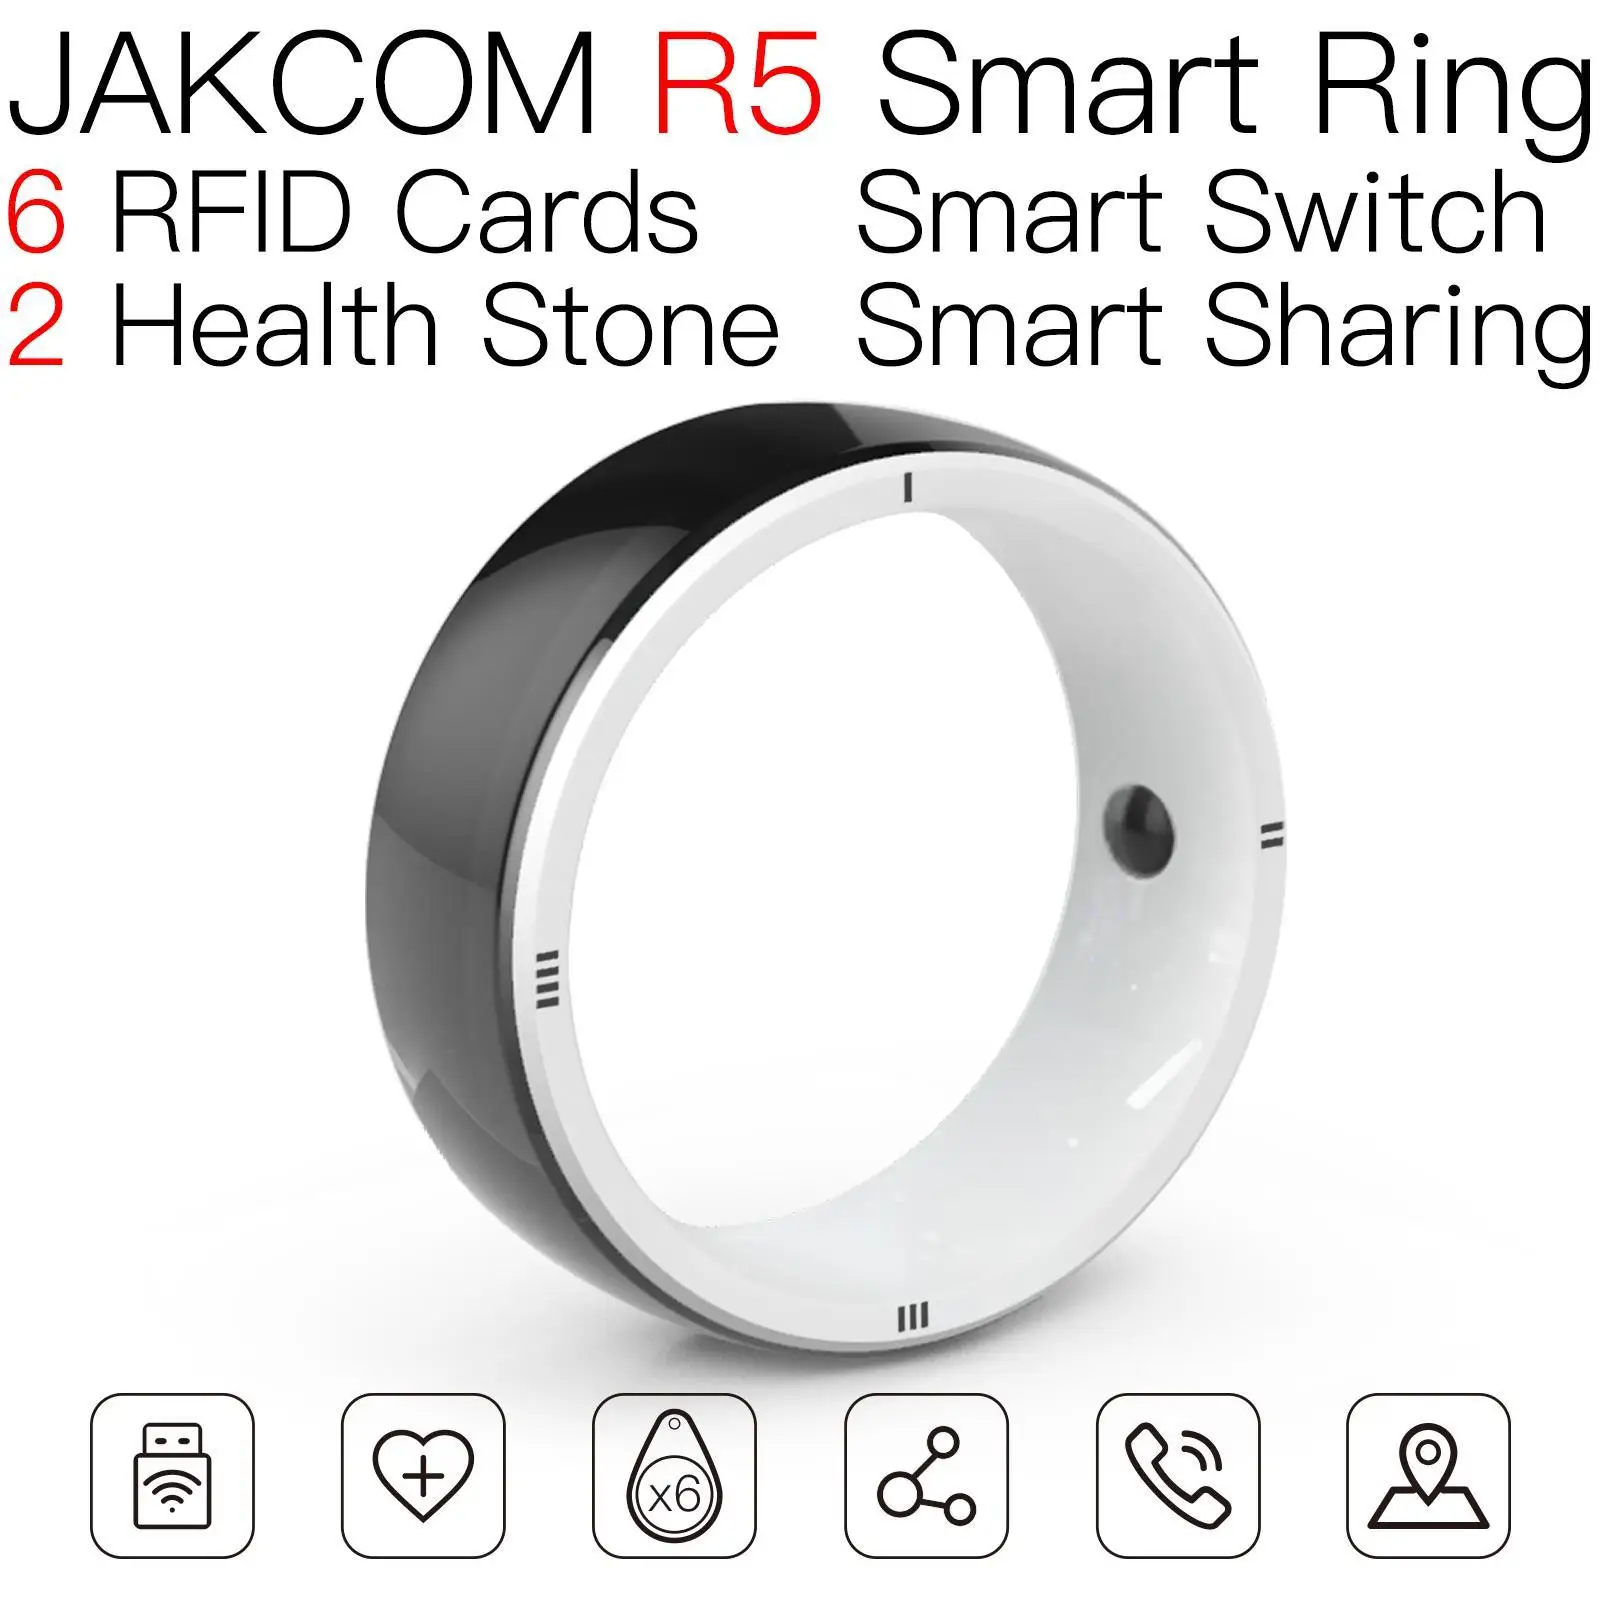 

JAKCOM R5 Smart Ring Super value as telephone sticker icon micro nfc uid changeable pet id tags blank epoxy rfid mini clothes